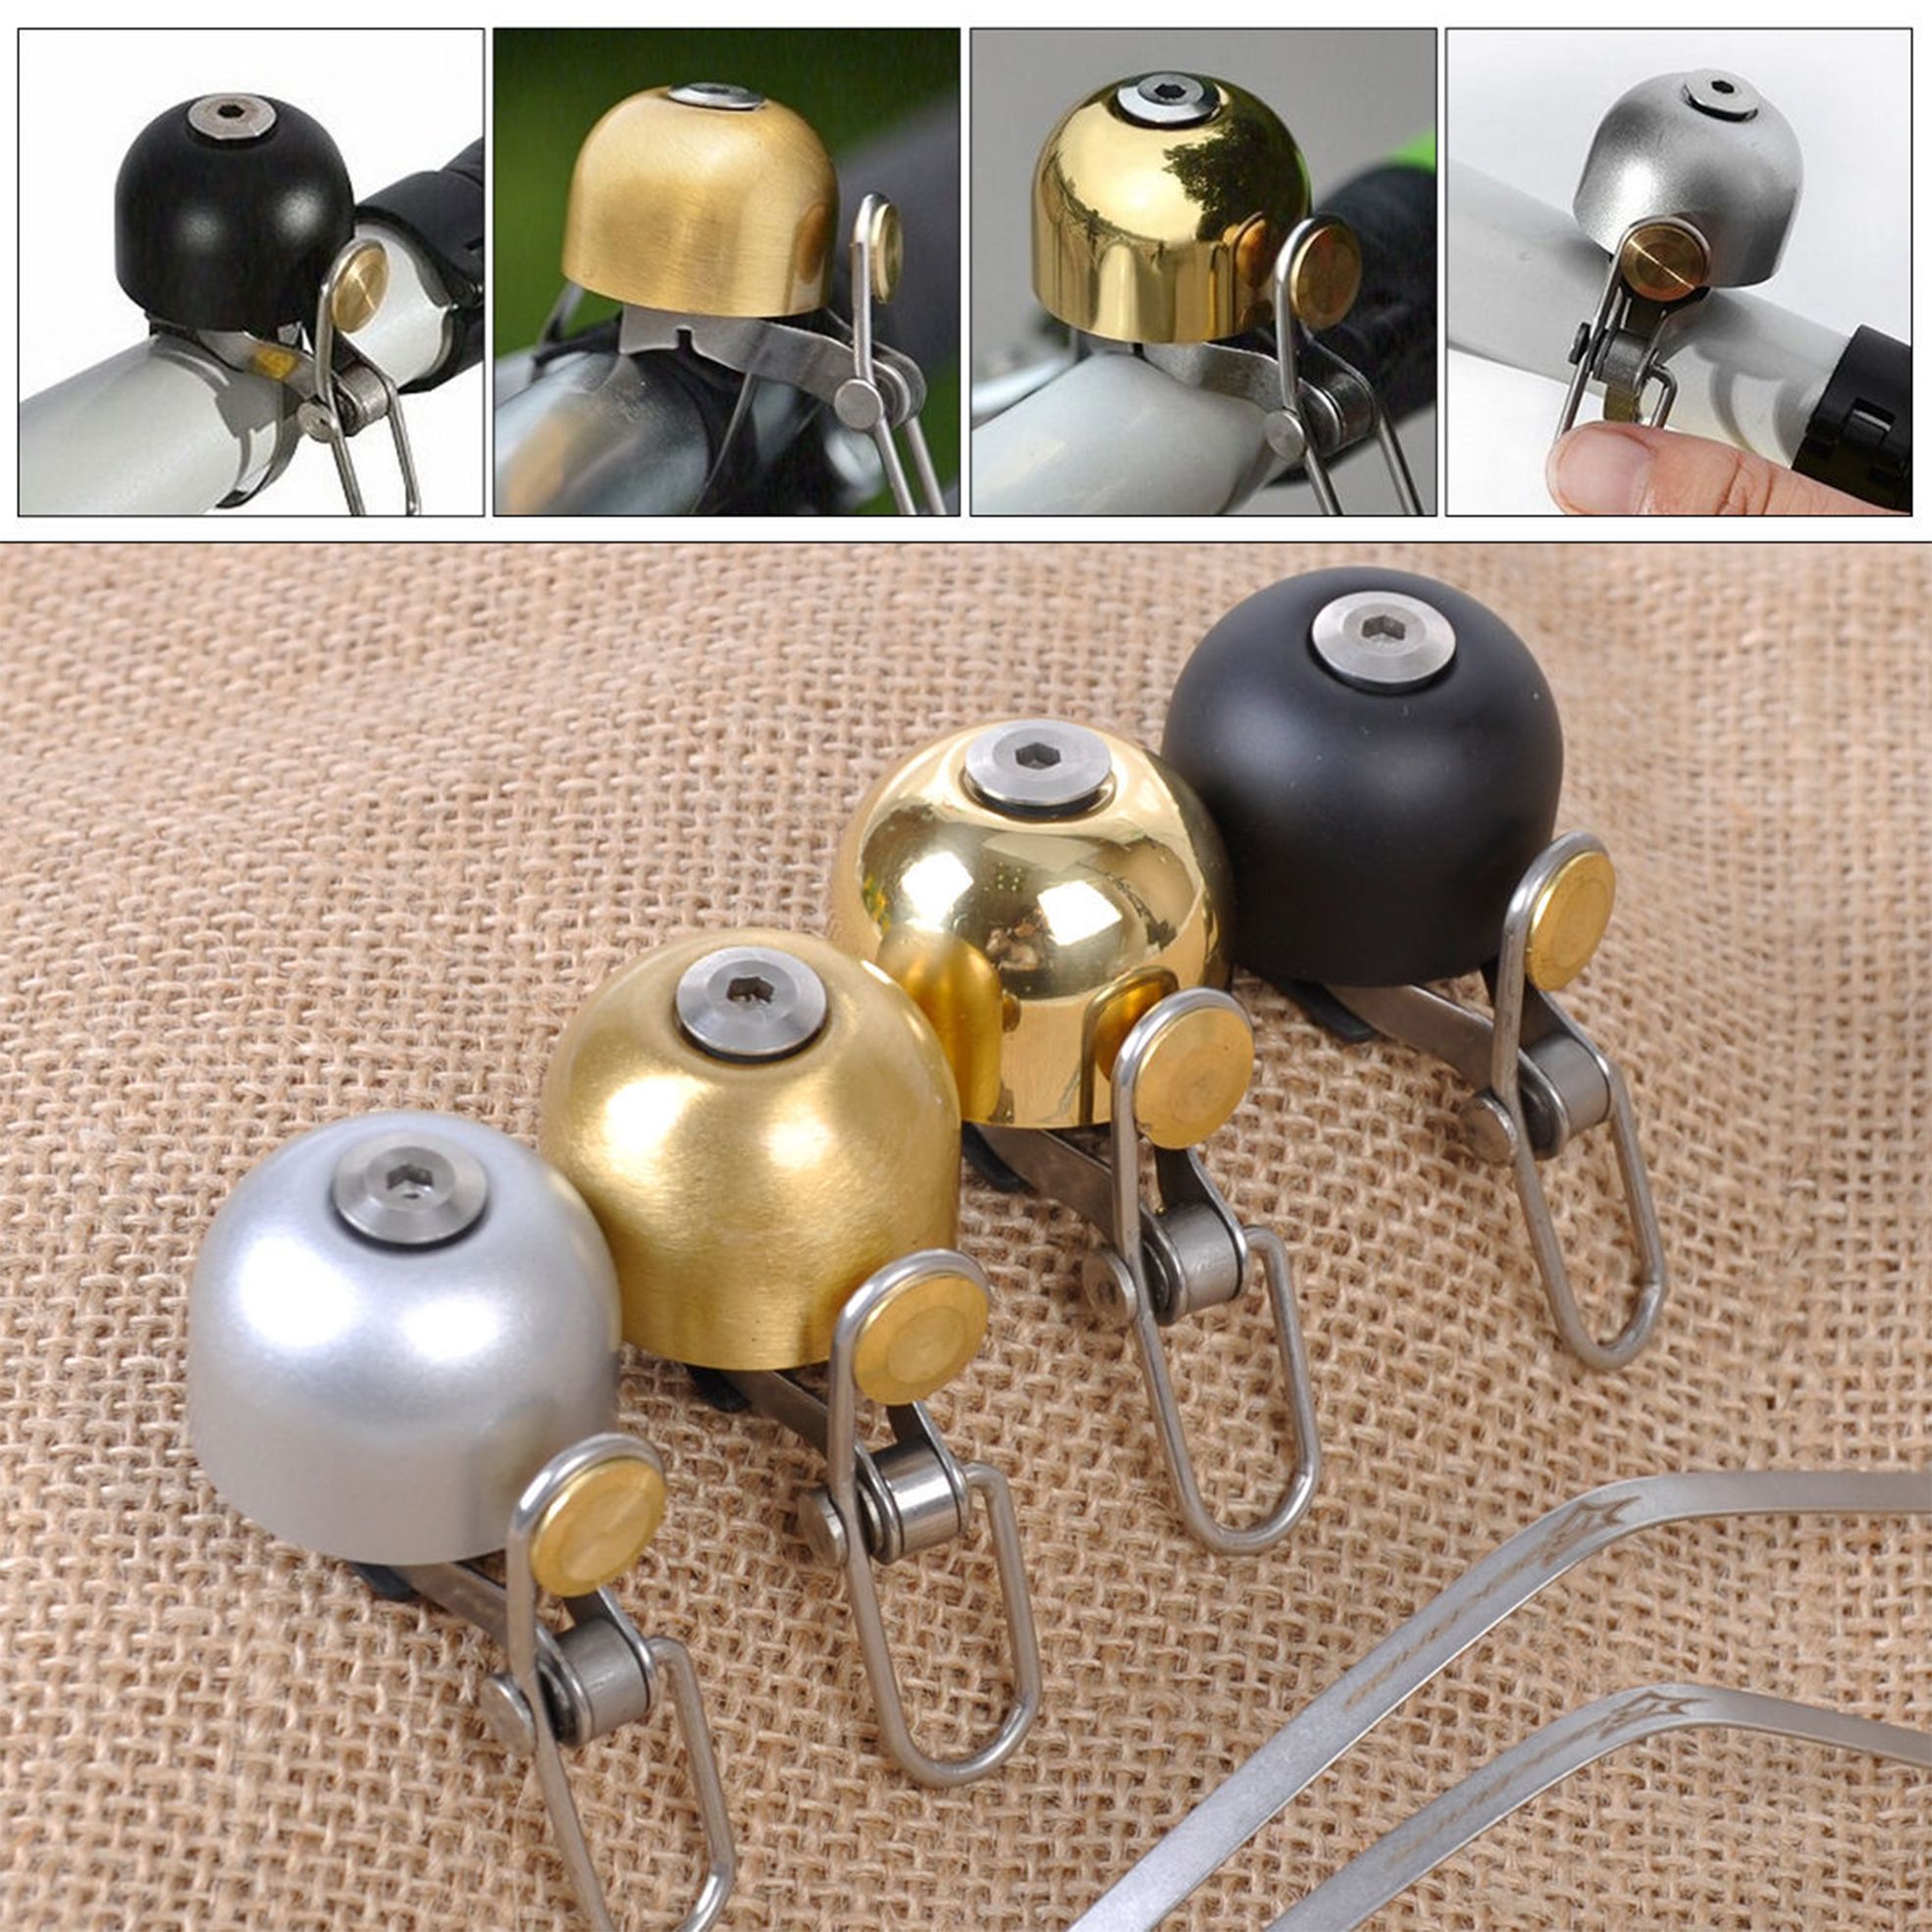 SIKONG Classic Bell Adults or Kids Bikes Crisp Sound Ringer Handlebars Long Sound Ringer Cruiser Bikes Retro Cycling Horn Bicycle Bell BIKE TOOL